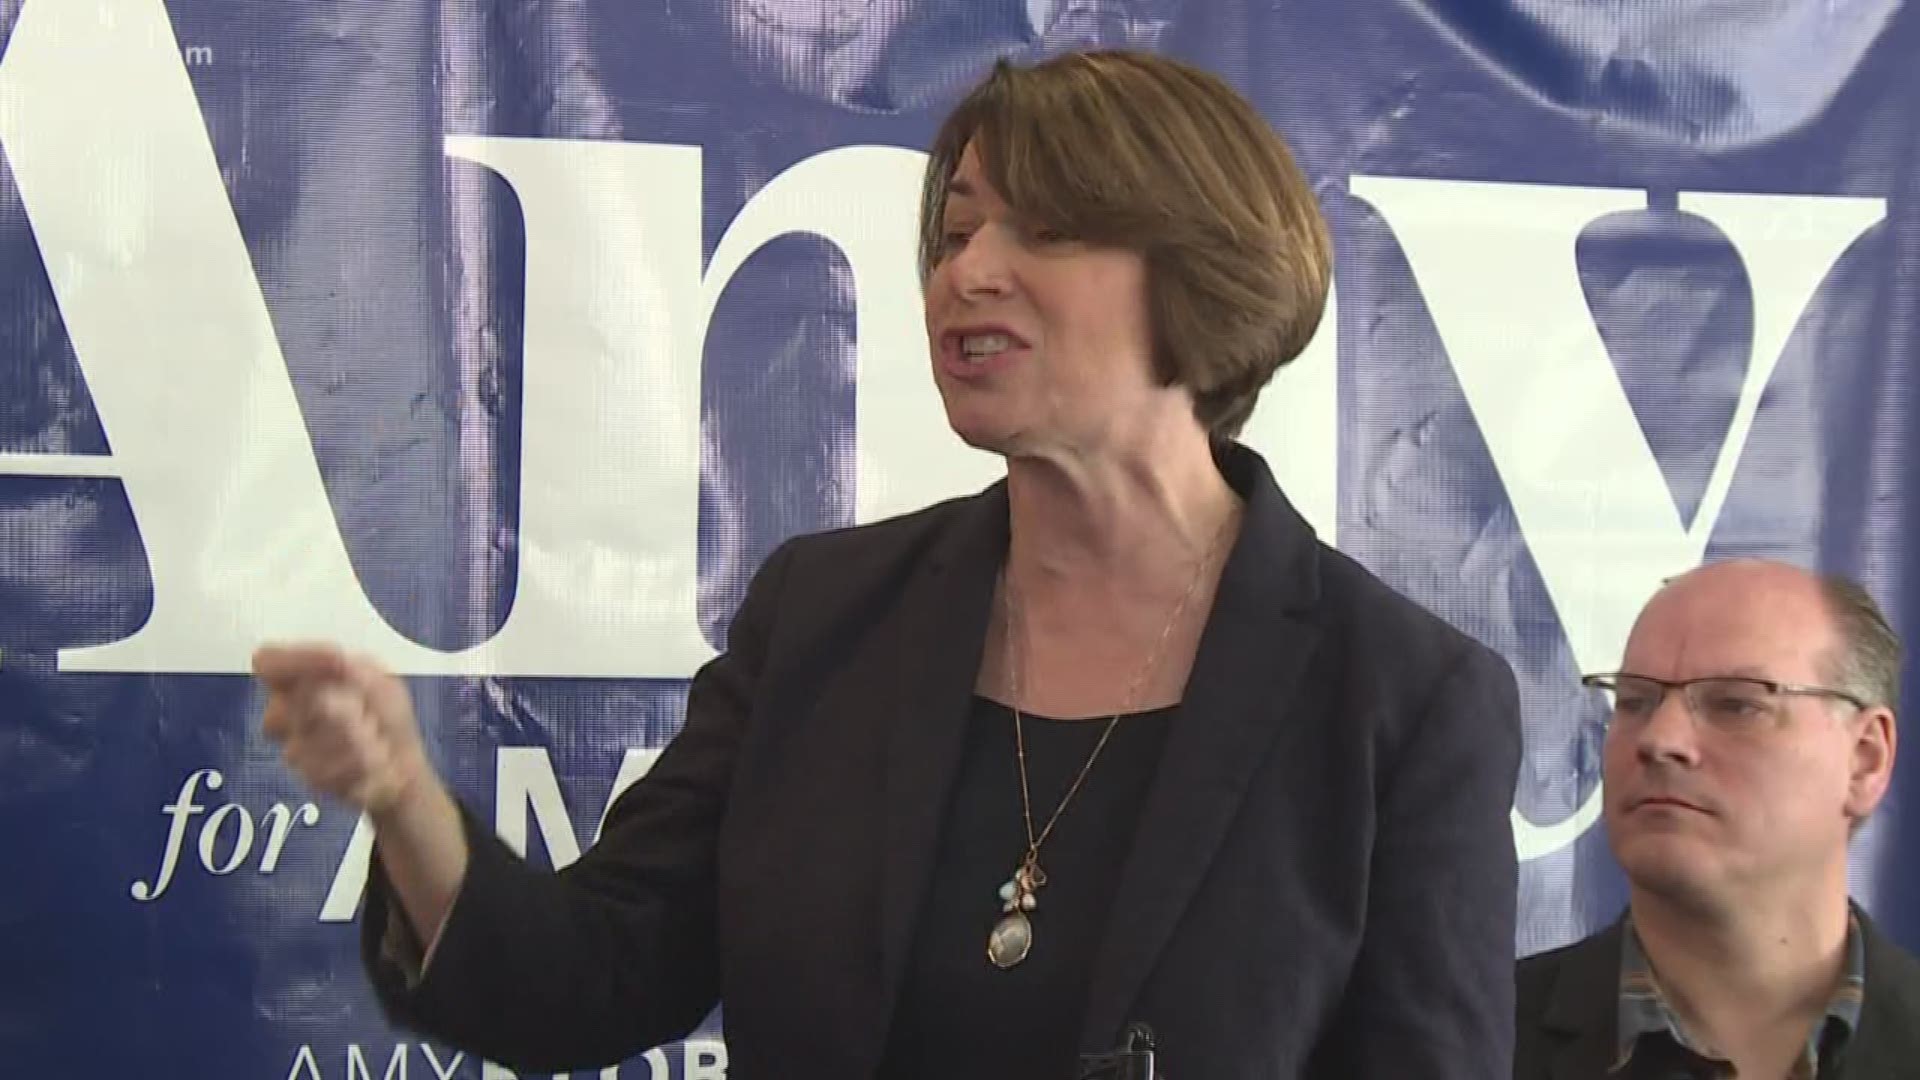 Klobuchar kicked off her presidential campaign by making Eau Claire, WI the first stop after her announcement at Boom Island Park last week.